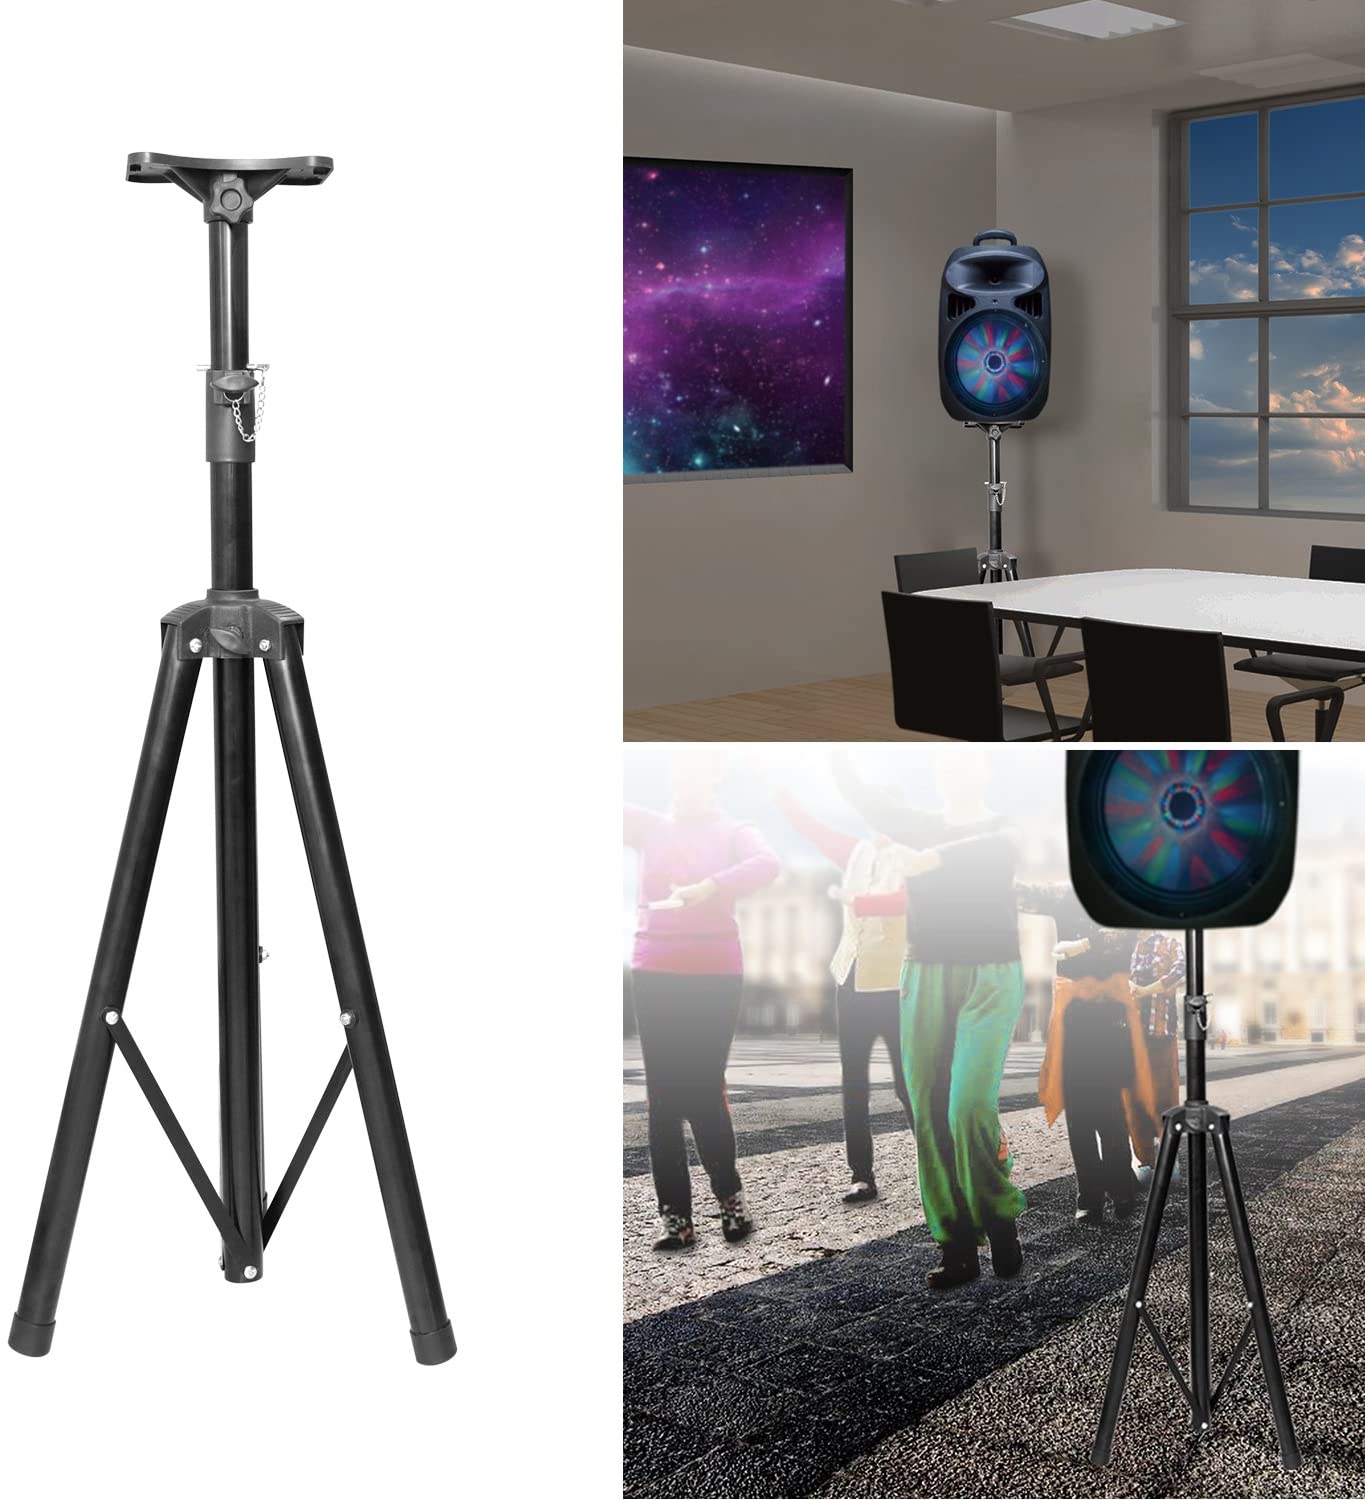 Projector Tripod Stand |Universal Speaker Stand Mount Holder |Adjustable Height from 40Inch to 71Inch] with Mounting Bracket & Rack Tray